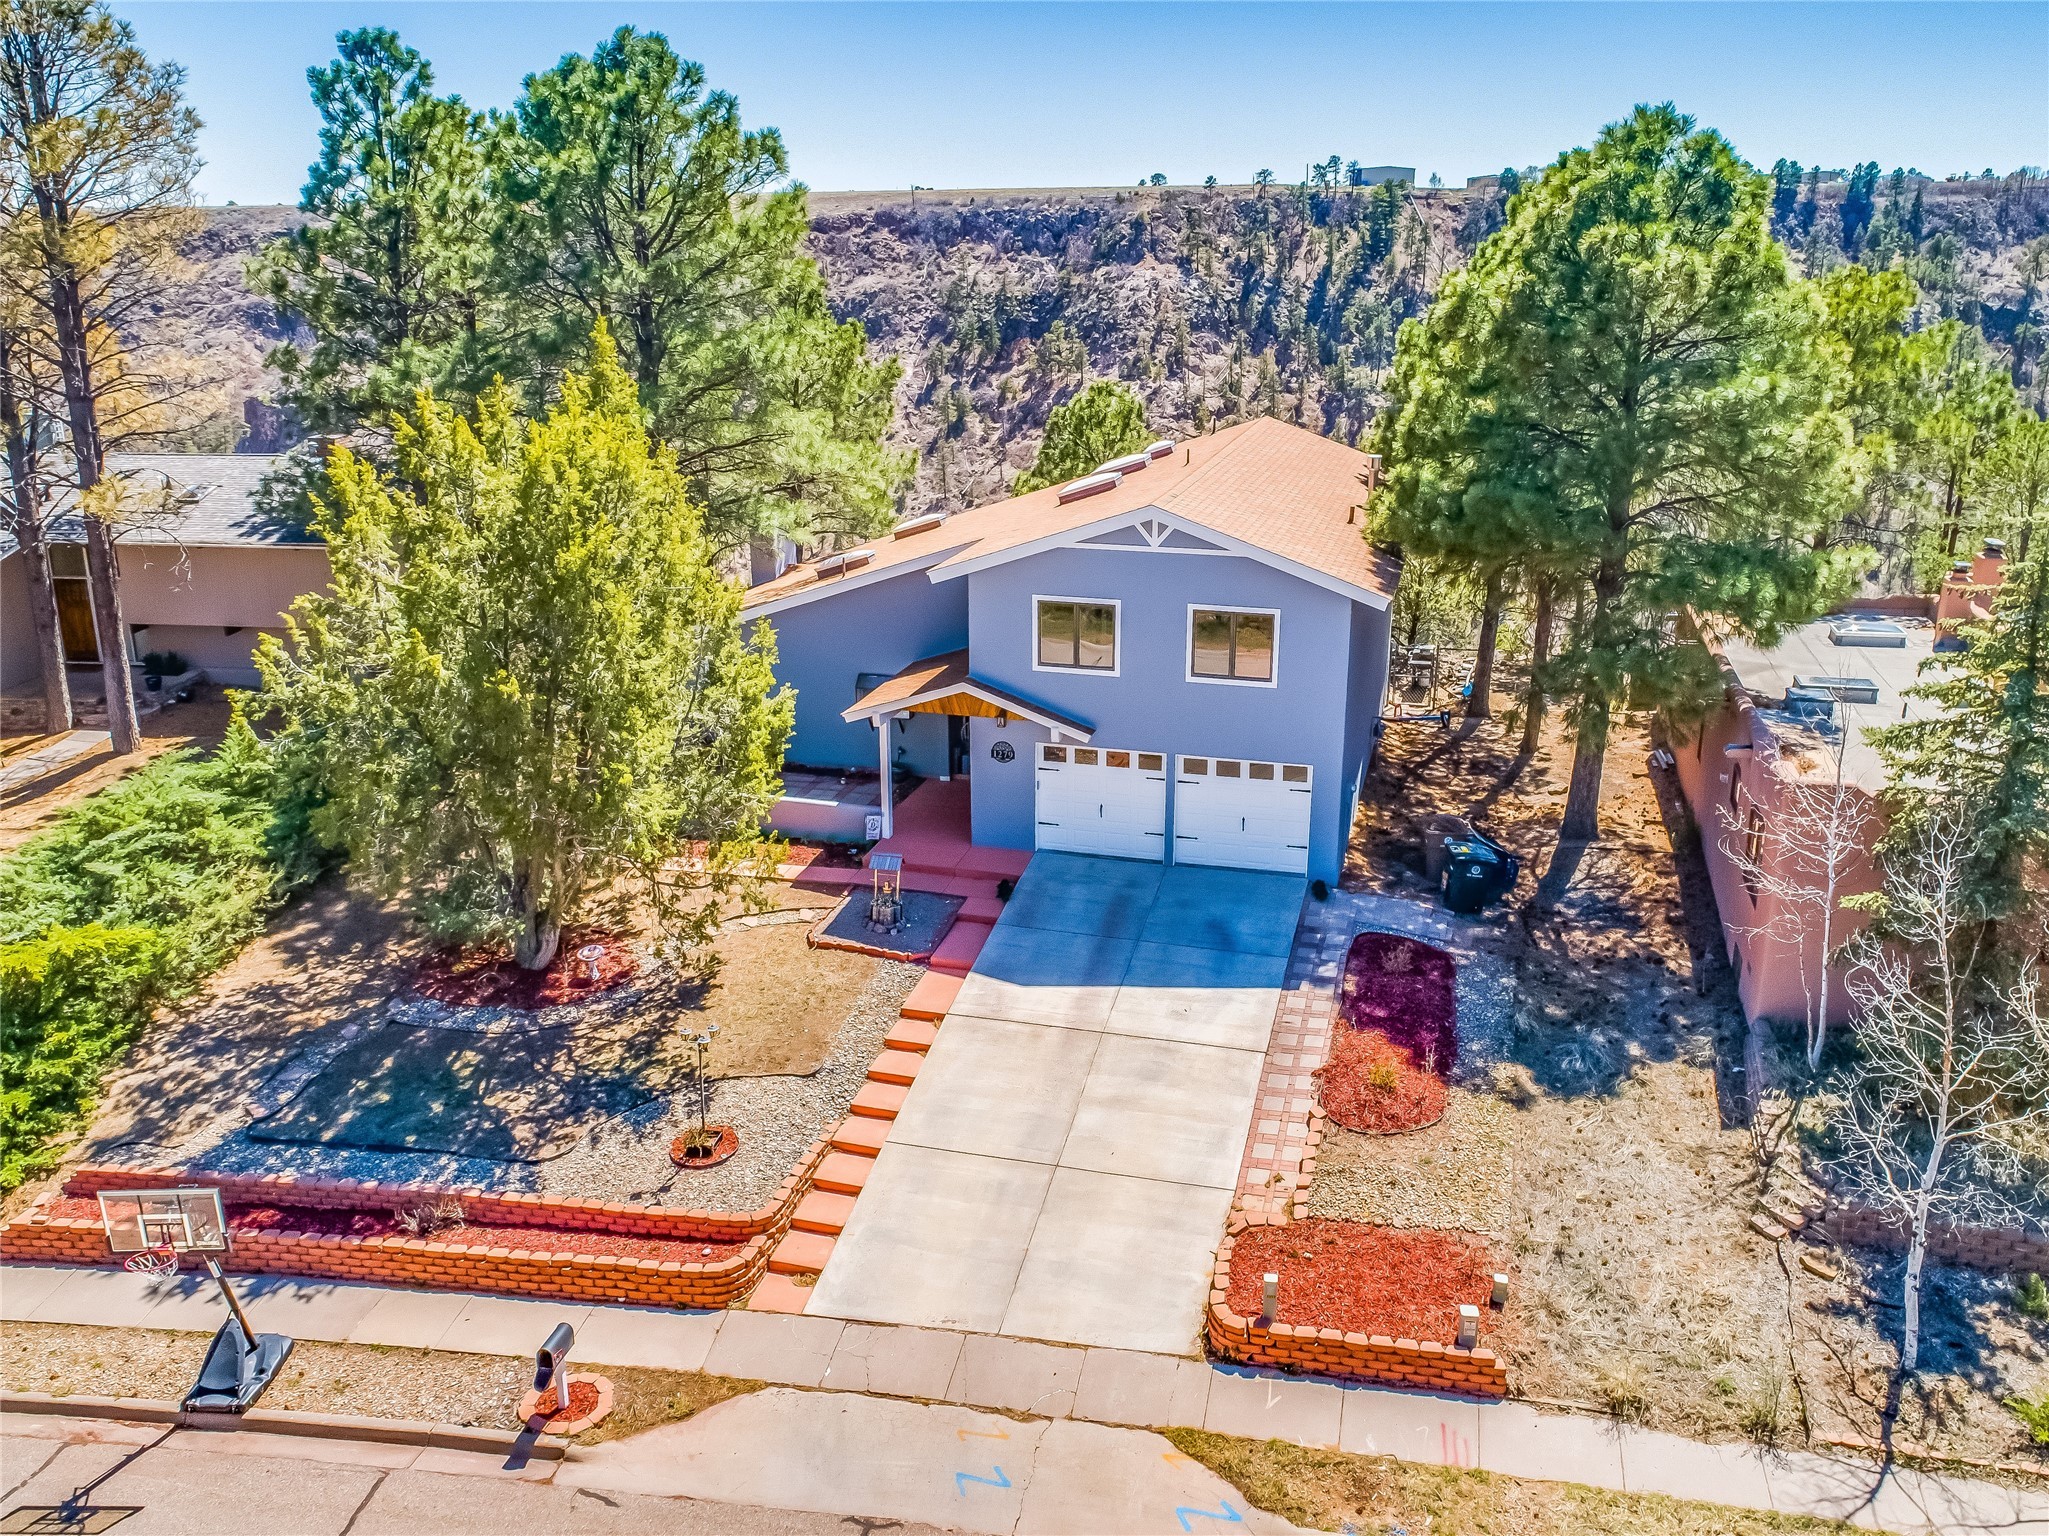 1279 San Ildefonso, Los Alamos, New Mexico 87544, 4 Bedrooms Bedrooms, ,3 BathroomsBathrooms,Residential,For Sale,1279 San Ildefonso,202401469